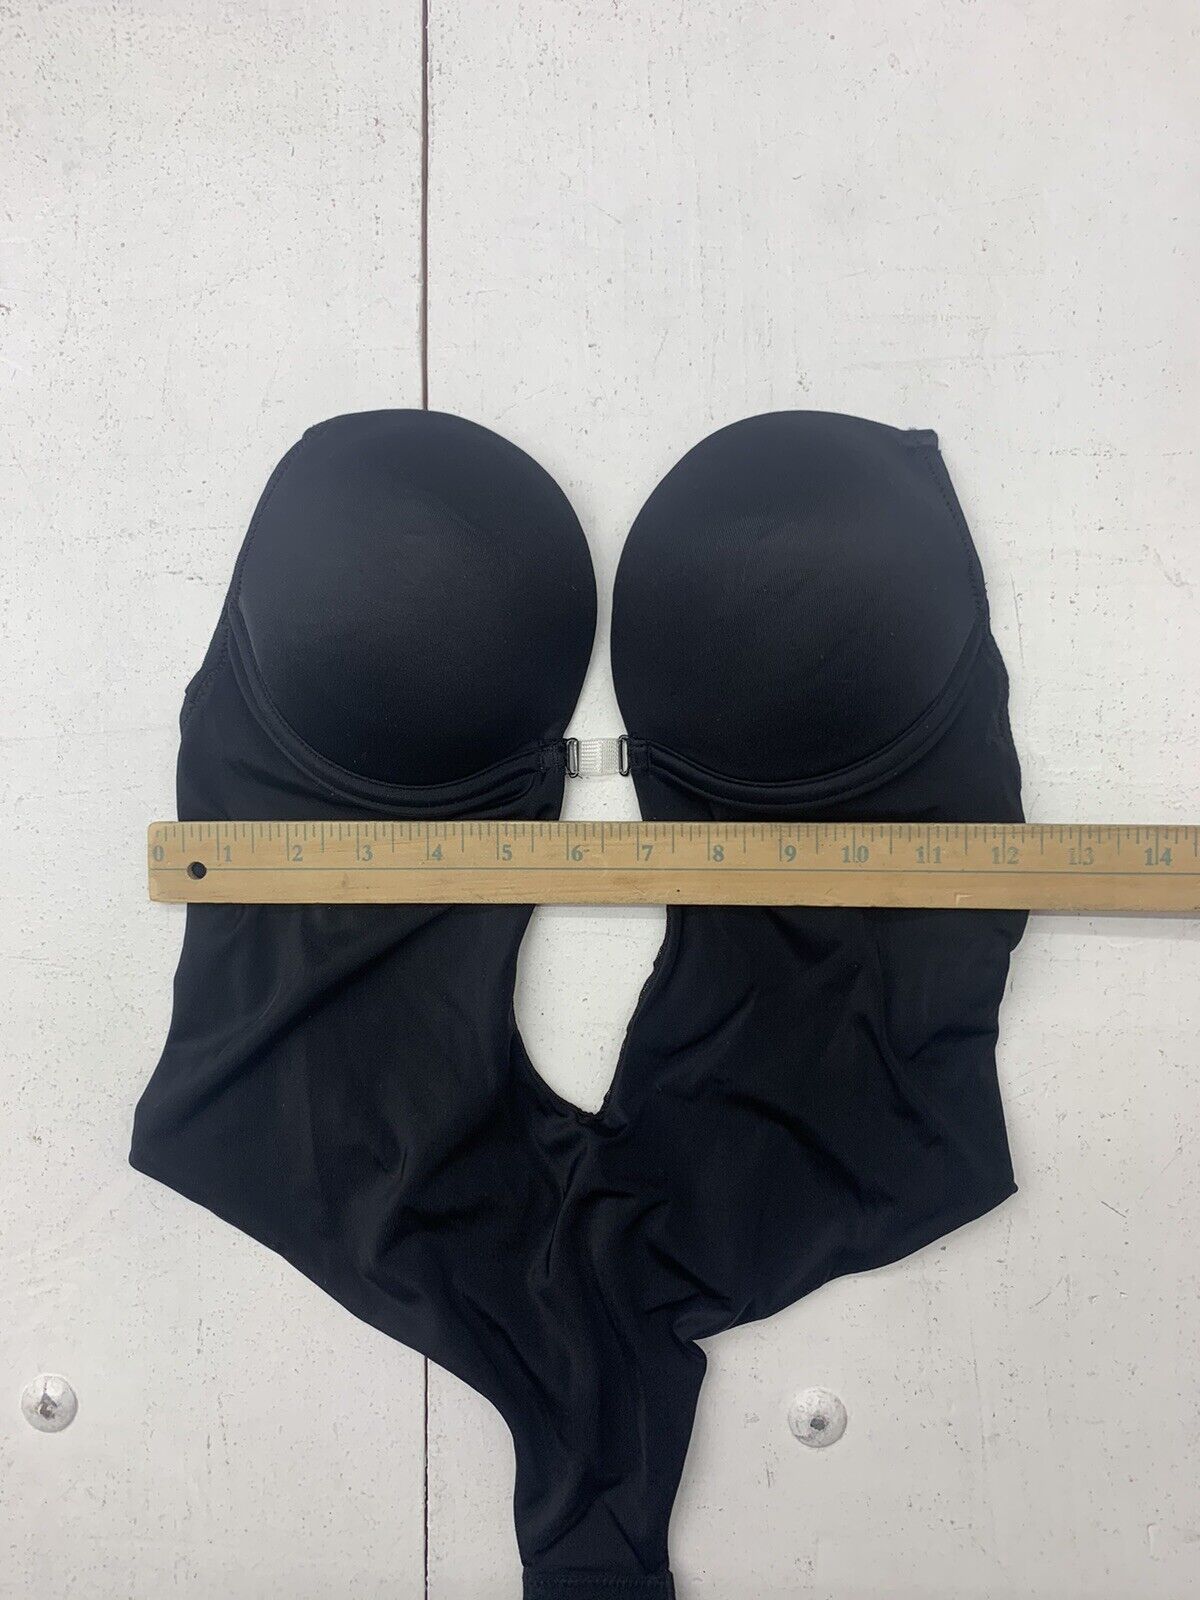 Unbranded Womens Black Backless Invisible Strap Bra Size 34